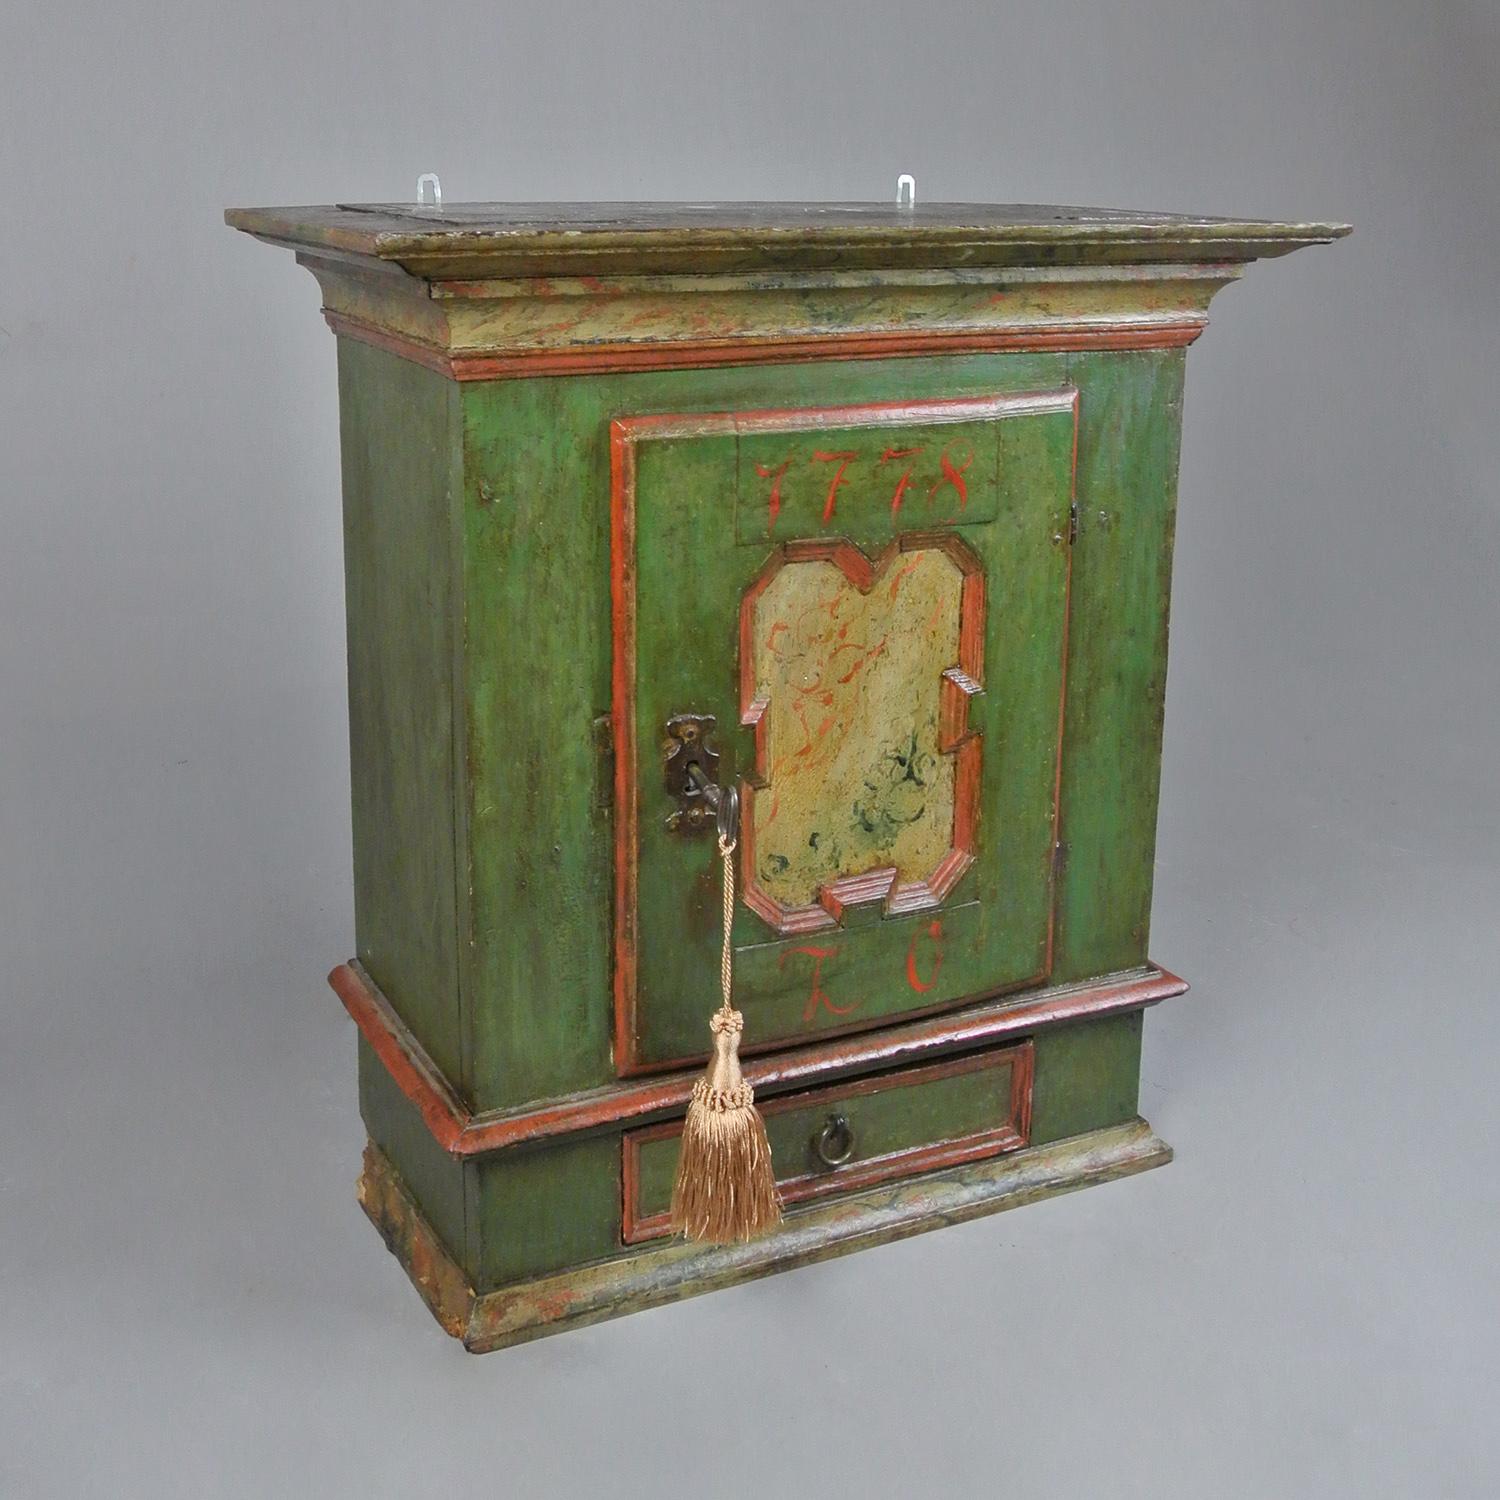 A charming 18th century wall hanging cabinet, Swedish, dated 1779 and with the initials L.O. Original painted finish in a soft green with orange highlights and with decorative foliate panel to door and the same pattern painted to the cornice and